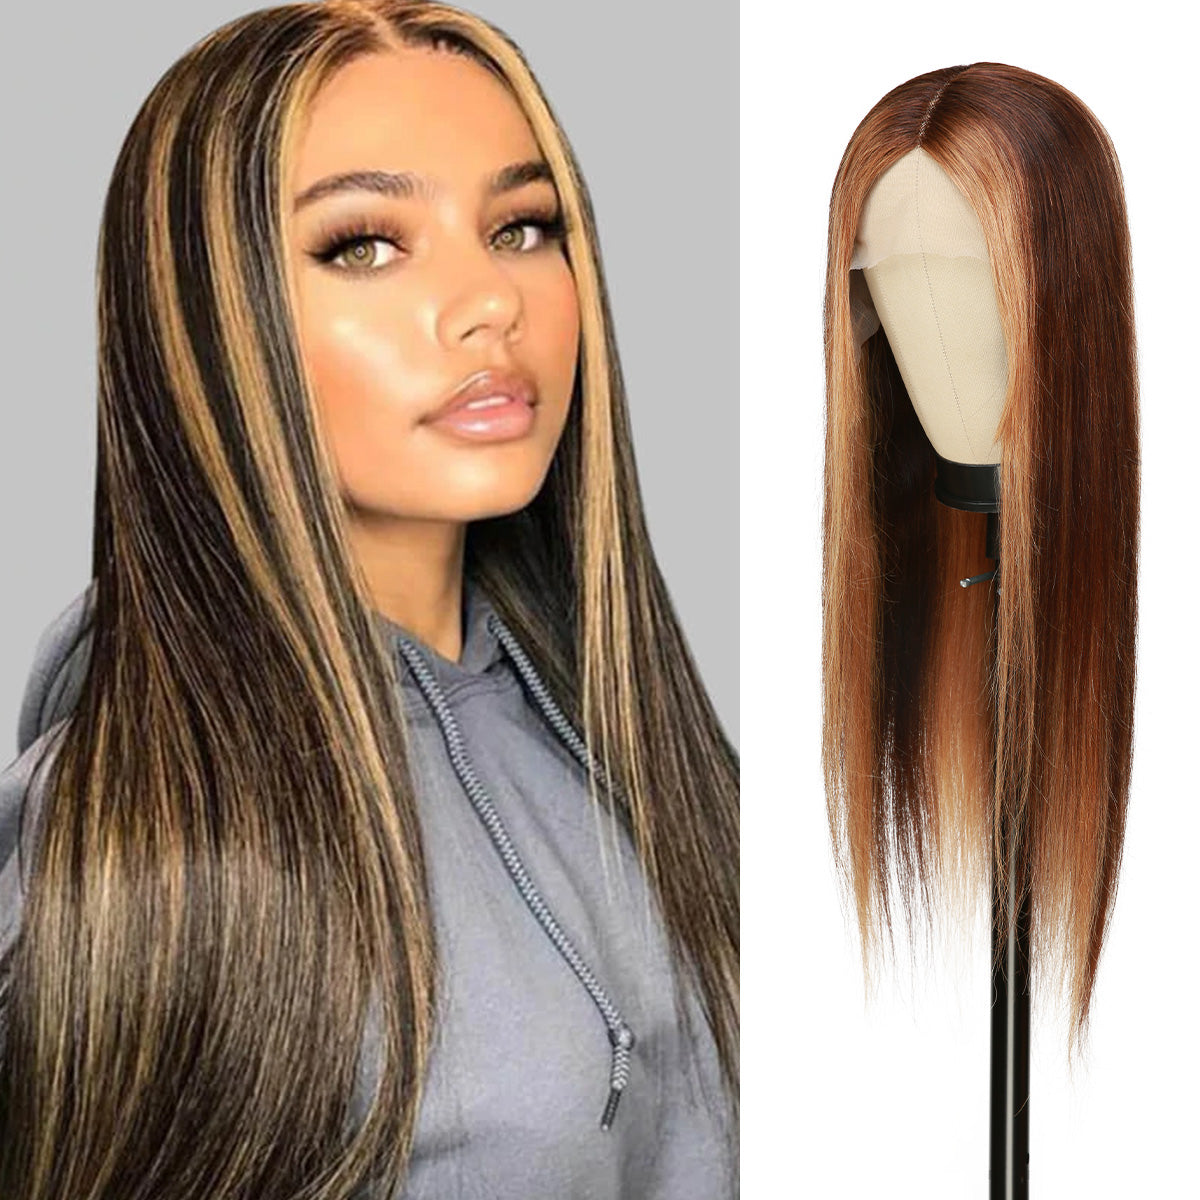 T shape lace part wig gives natural hairline and realistic lace part with affordable price, 100% Human Hair Pre-dyed Fancy Color For Black Women, 150% Density High Quality Blonde Hair, Pre-Plucked with Baby Hair, Balayage Brown Chunky Highlight Straight Hair, Beautiful ombre brown highlight color fashion and elegant and charming